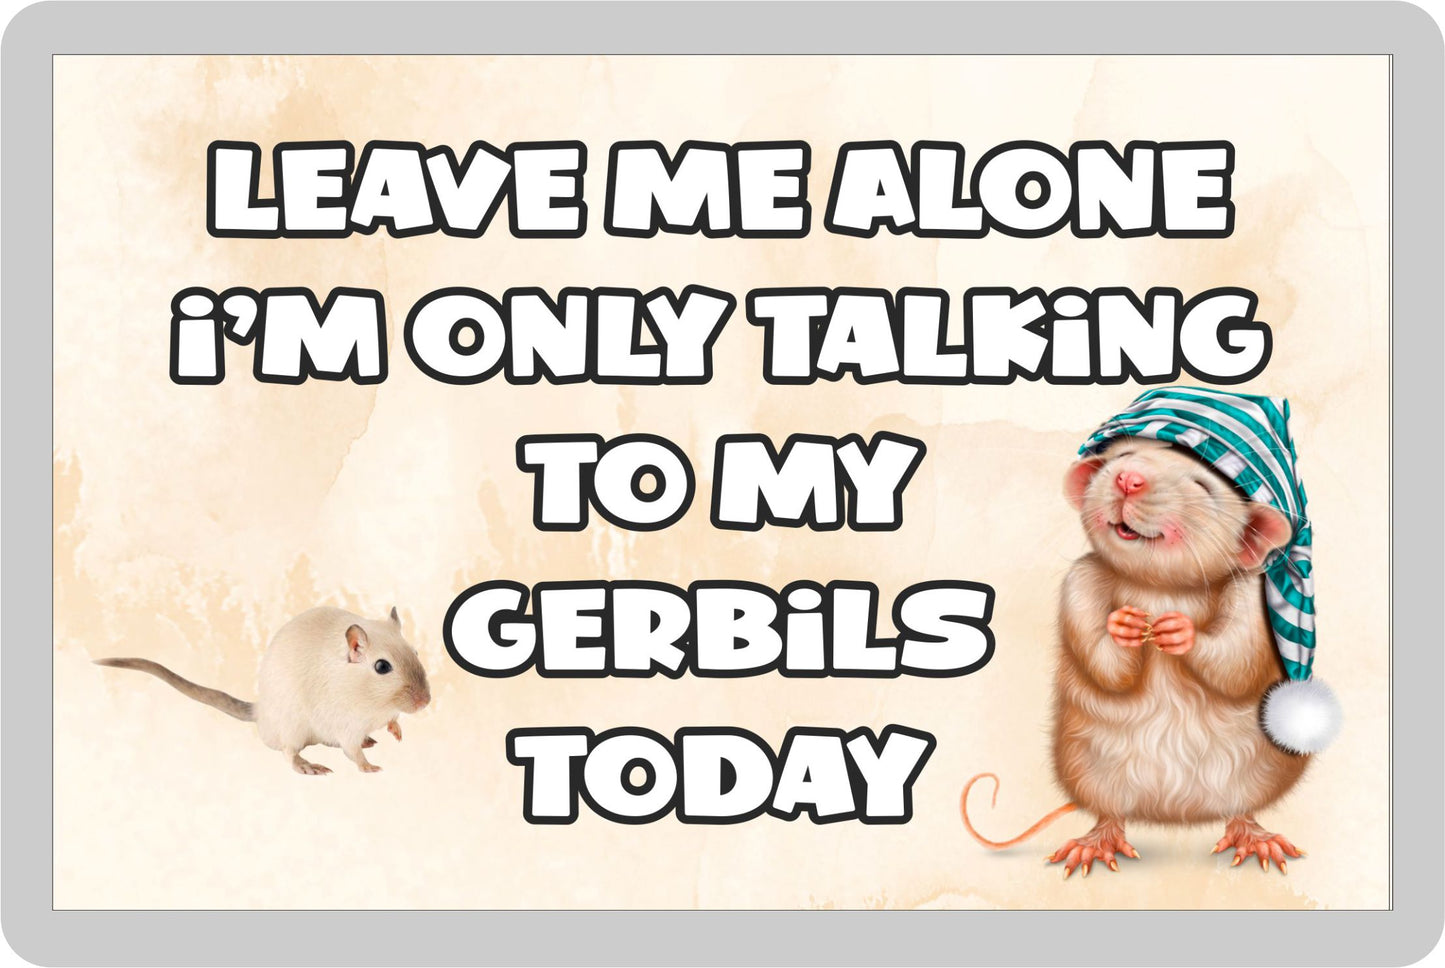 Gerbil Fridge Magnet Gift - Leave Me Alone I'm Only Talking To My * Today - Novelty Cute Bird Animal Present